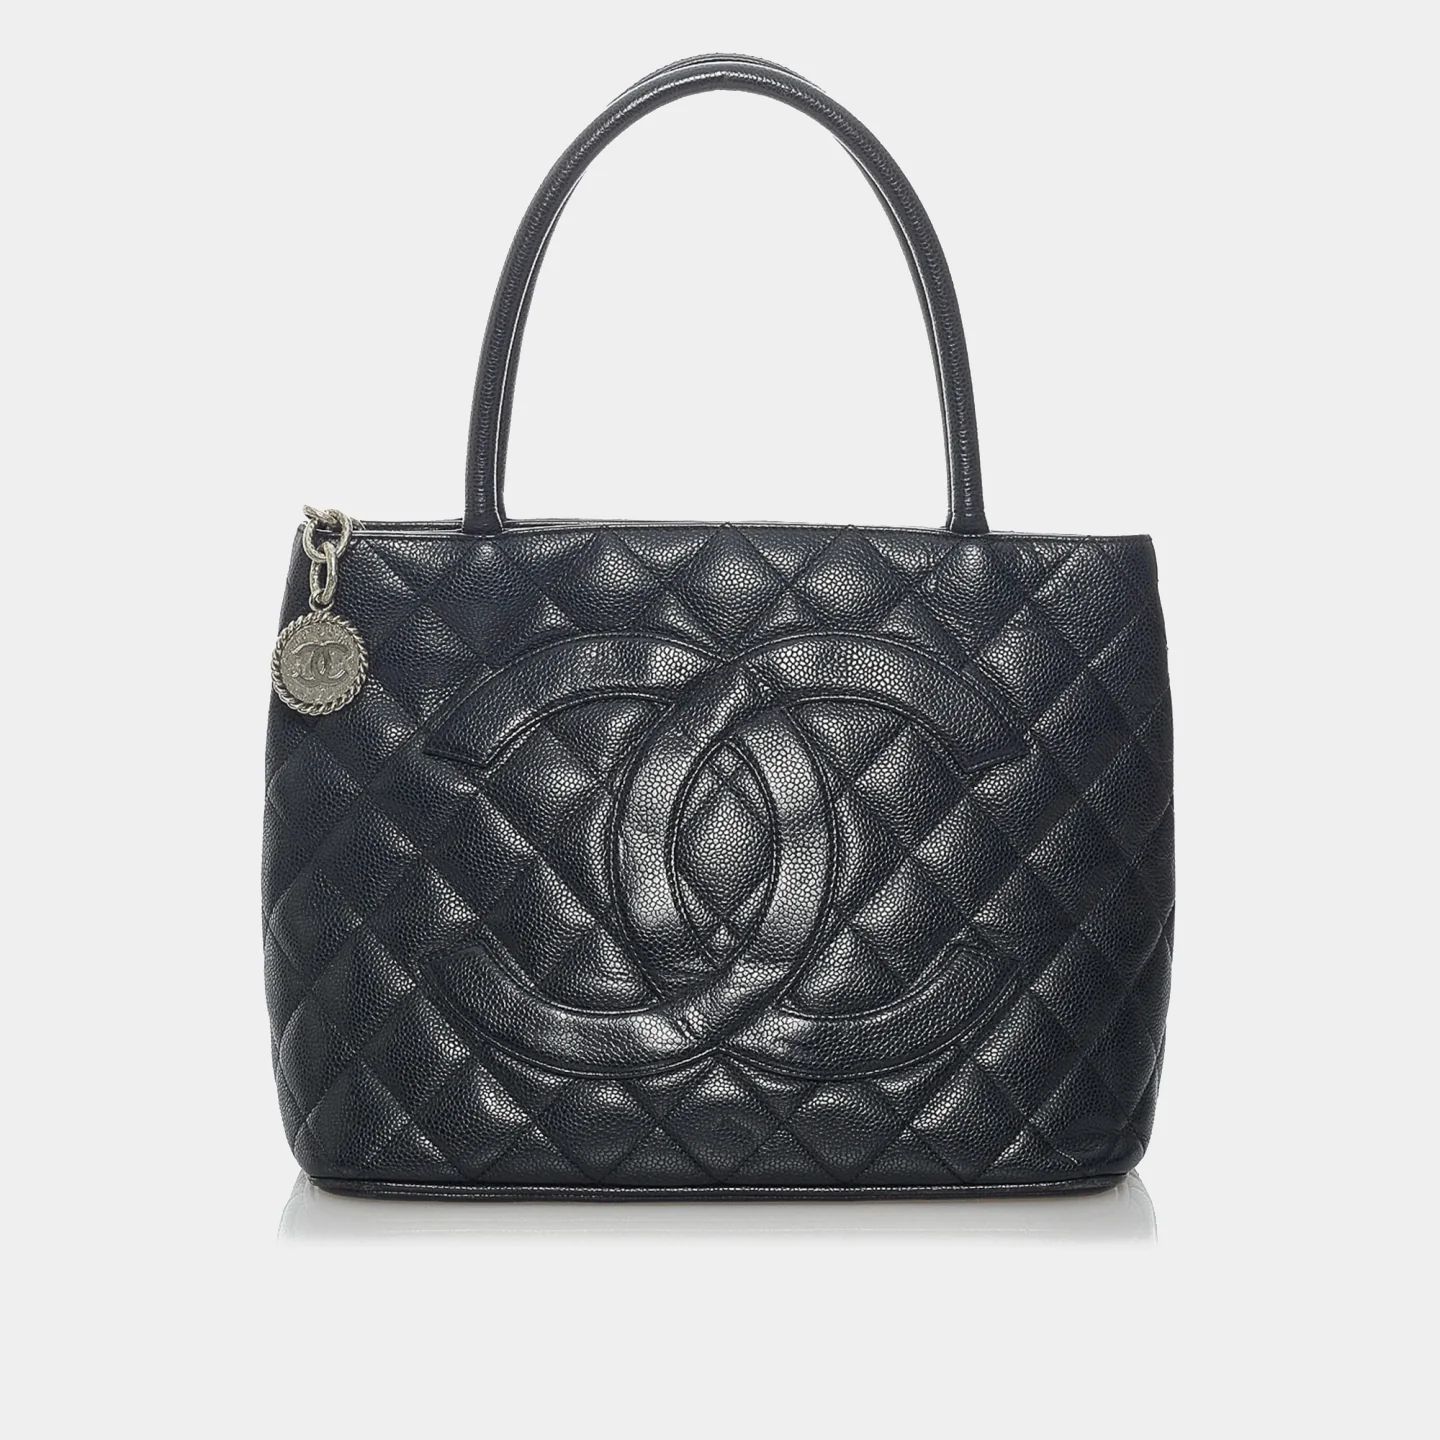 Chanel Medallion Tote in Black Lord & Taylor | Lord & Taylor